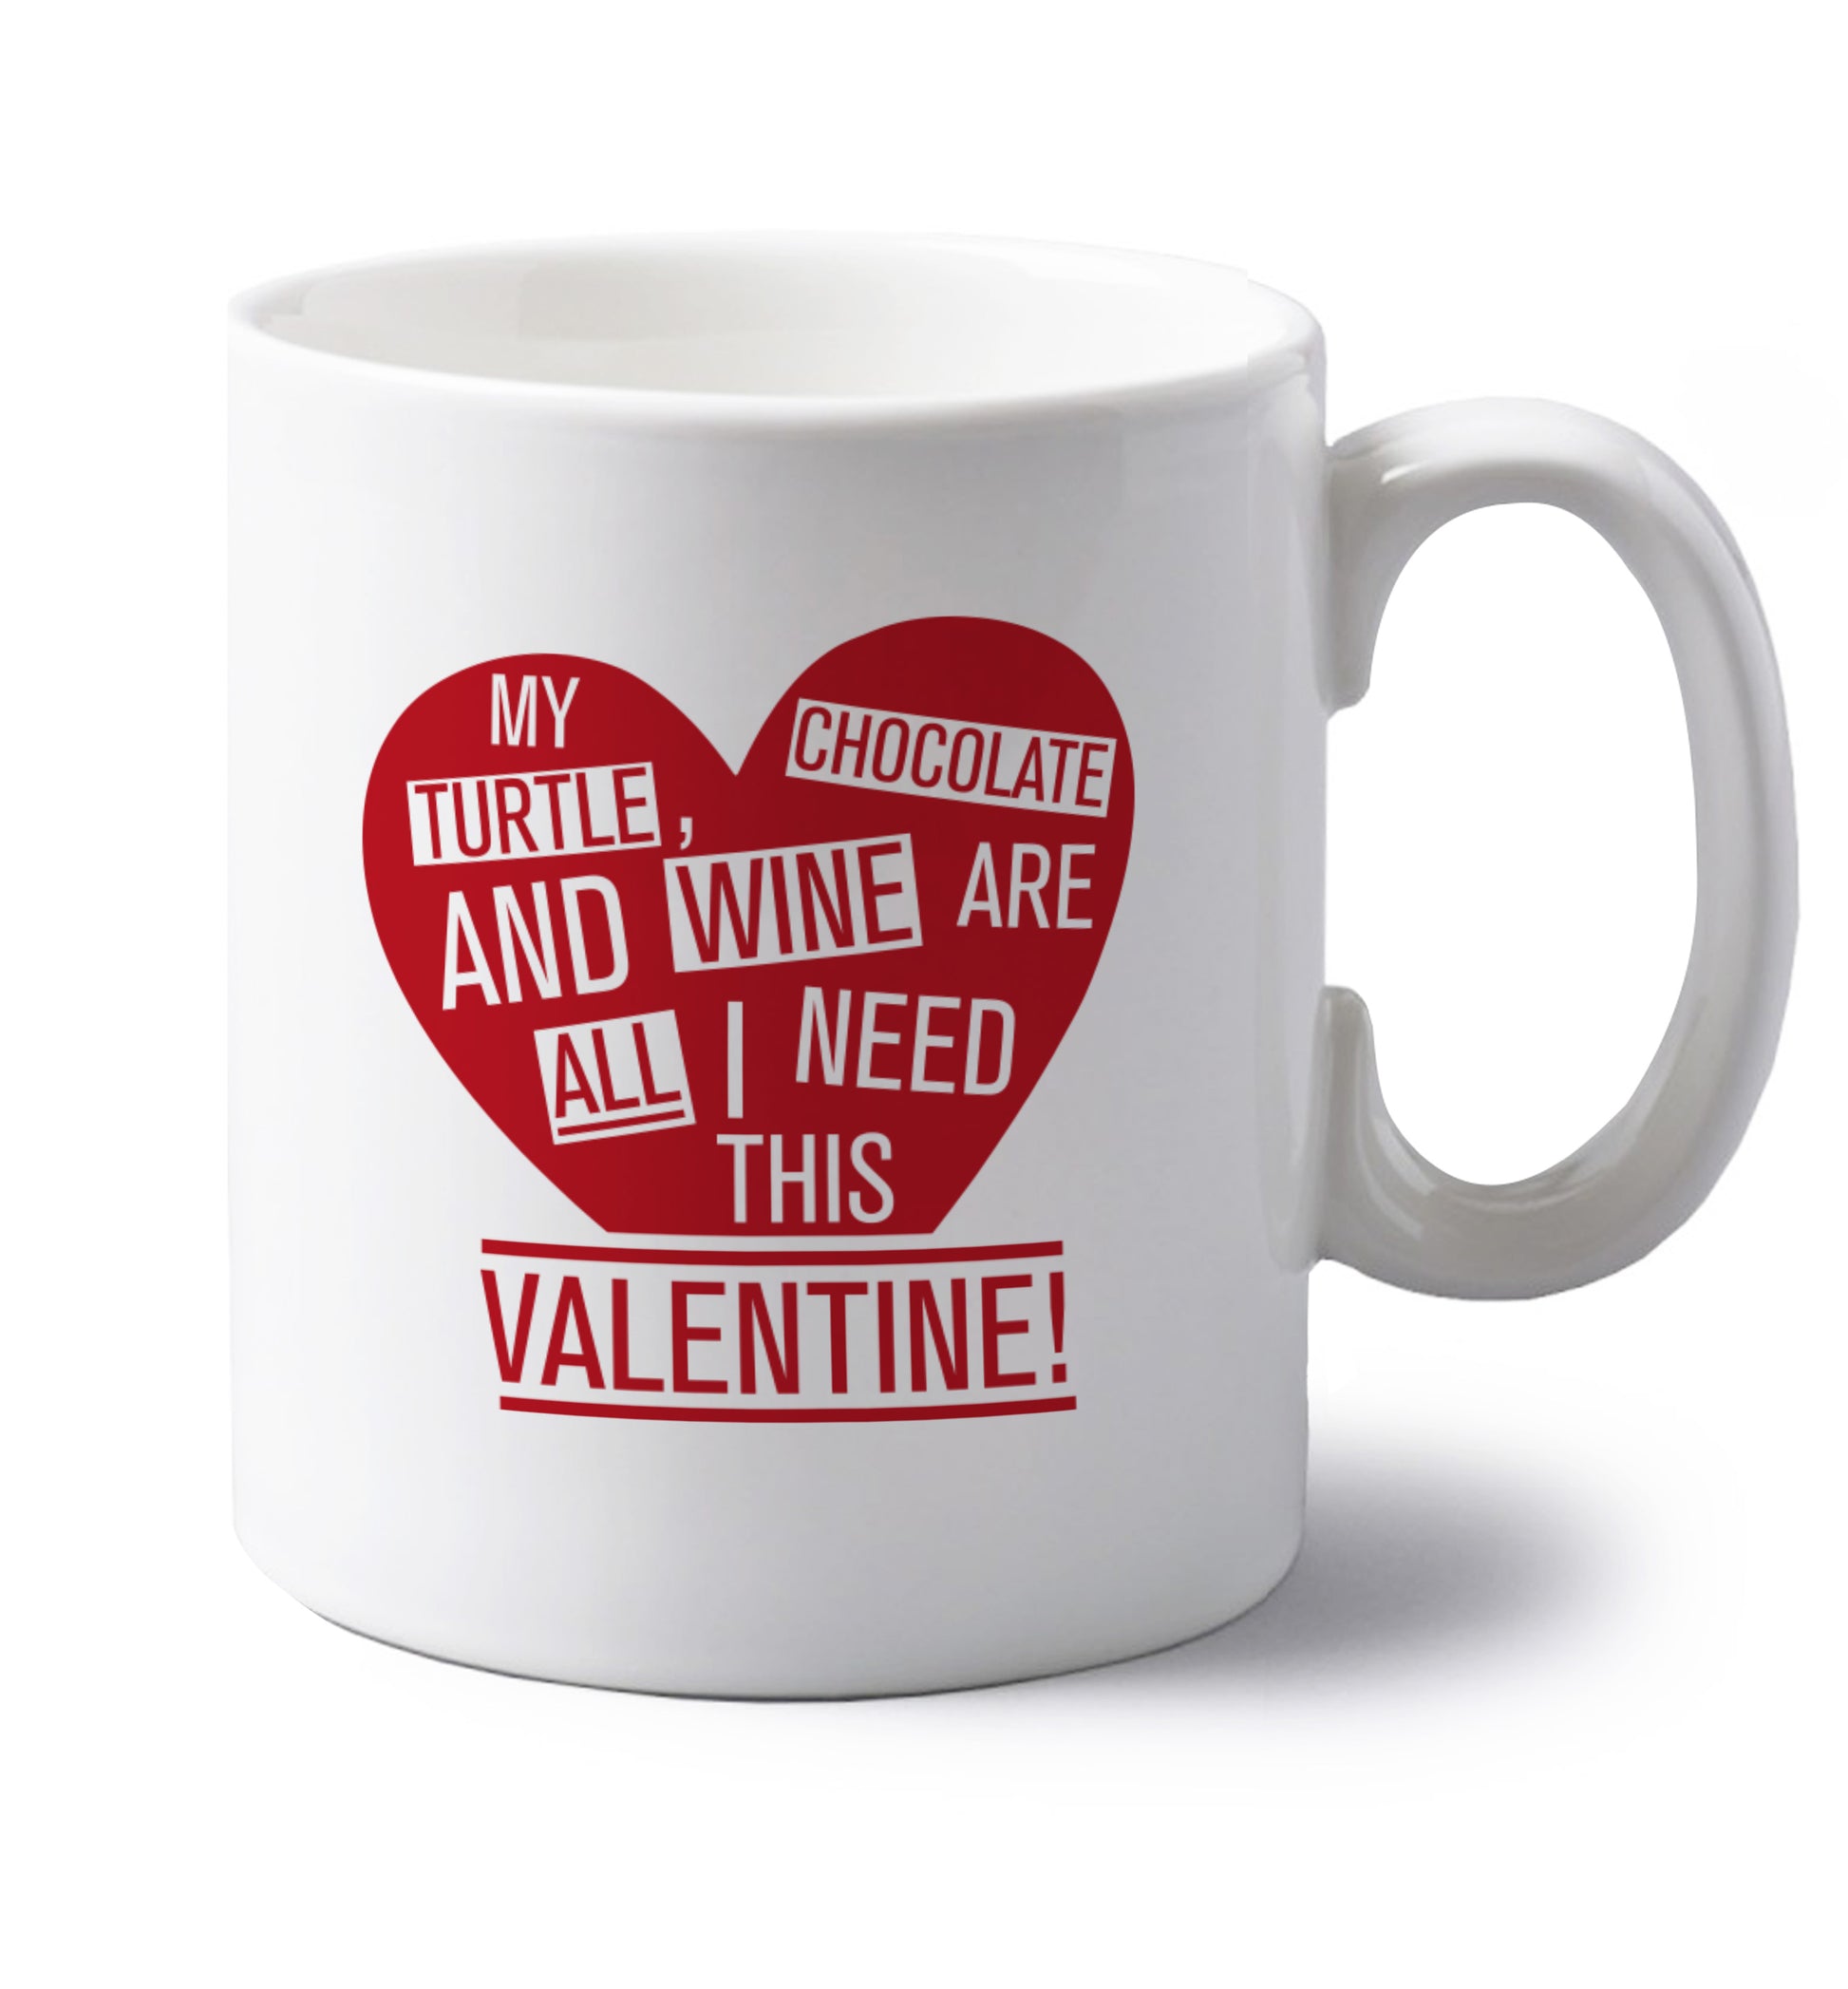 My turtle, chocolate and wine are all I need this valentine! left handed white ceramic mug 